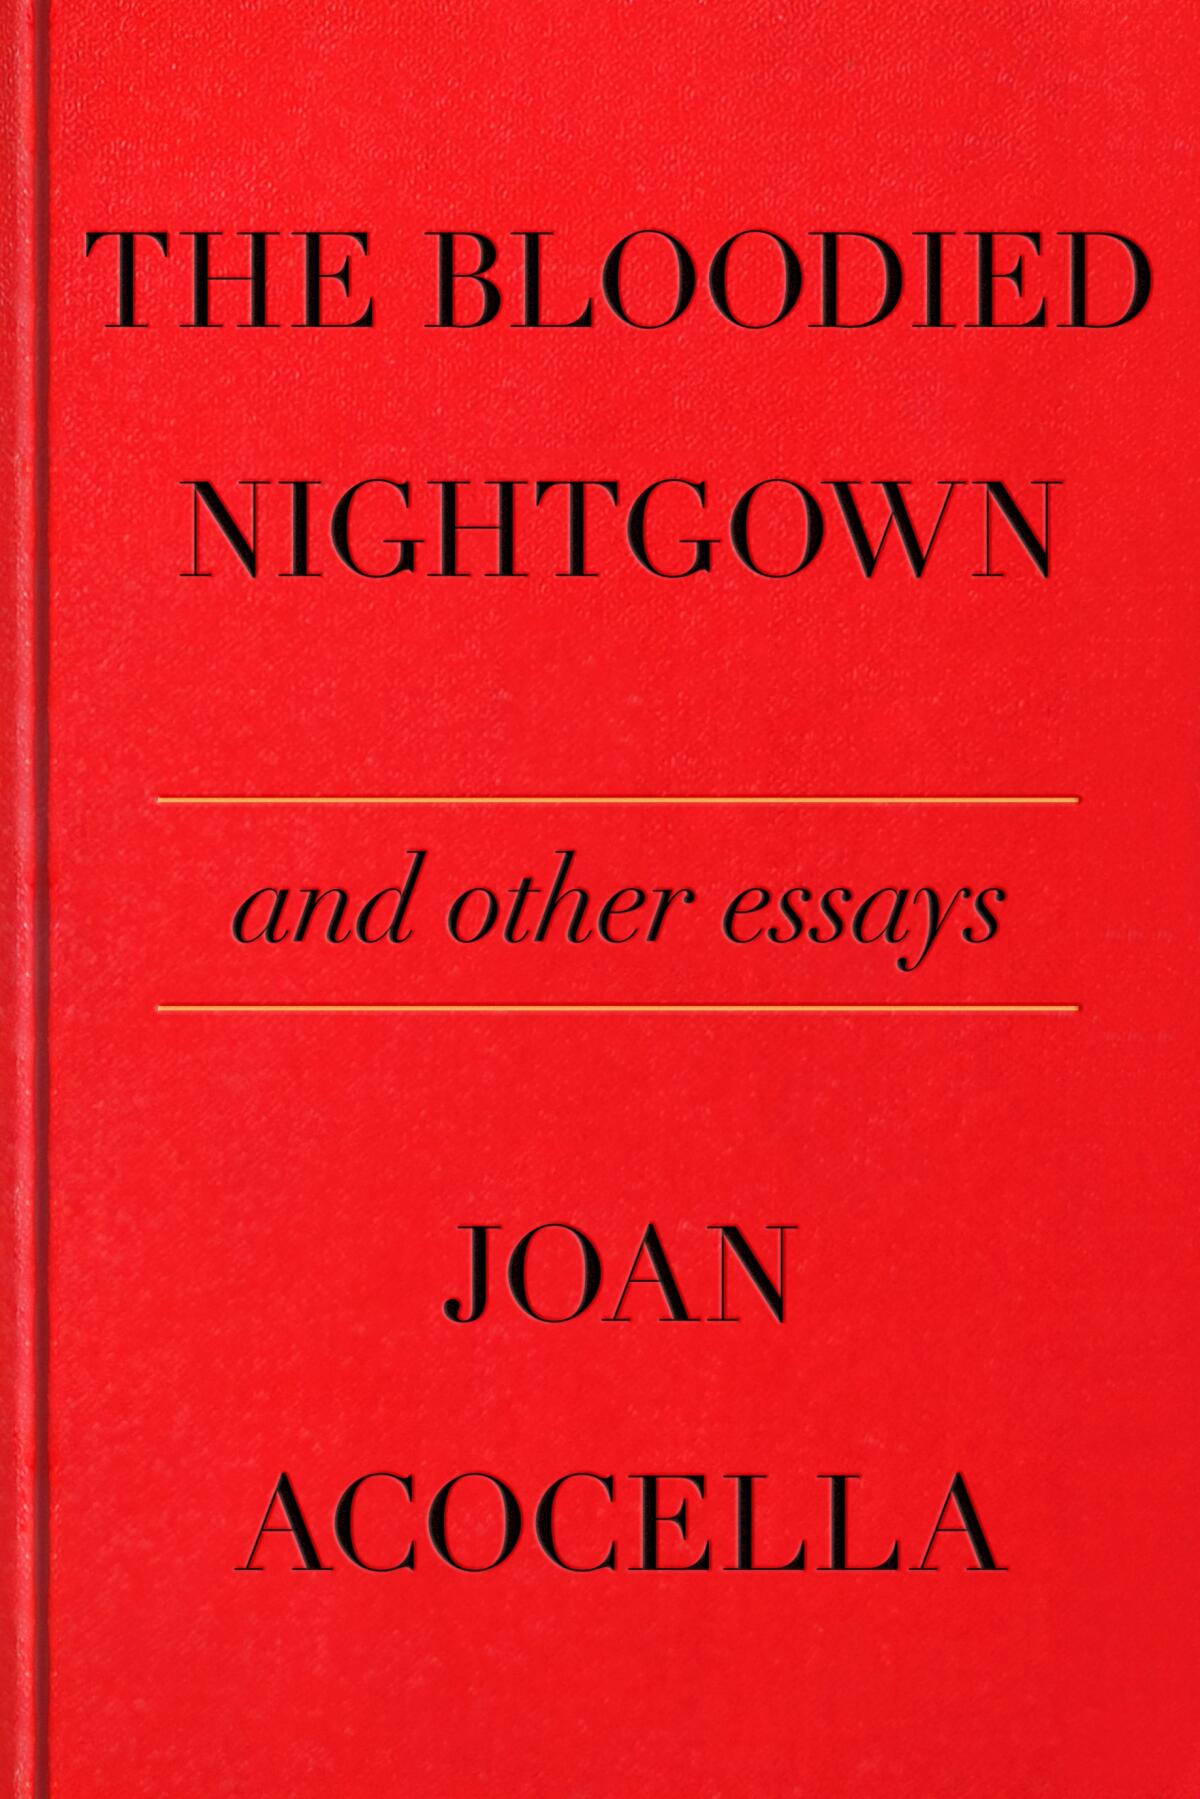 The Bloodied Nightgown and Other Essays by Joan Acocella